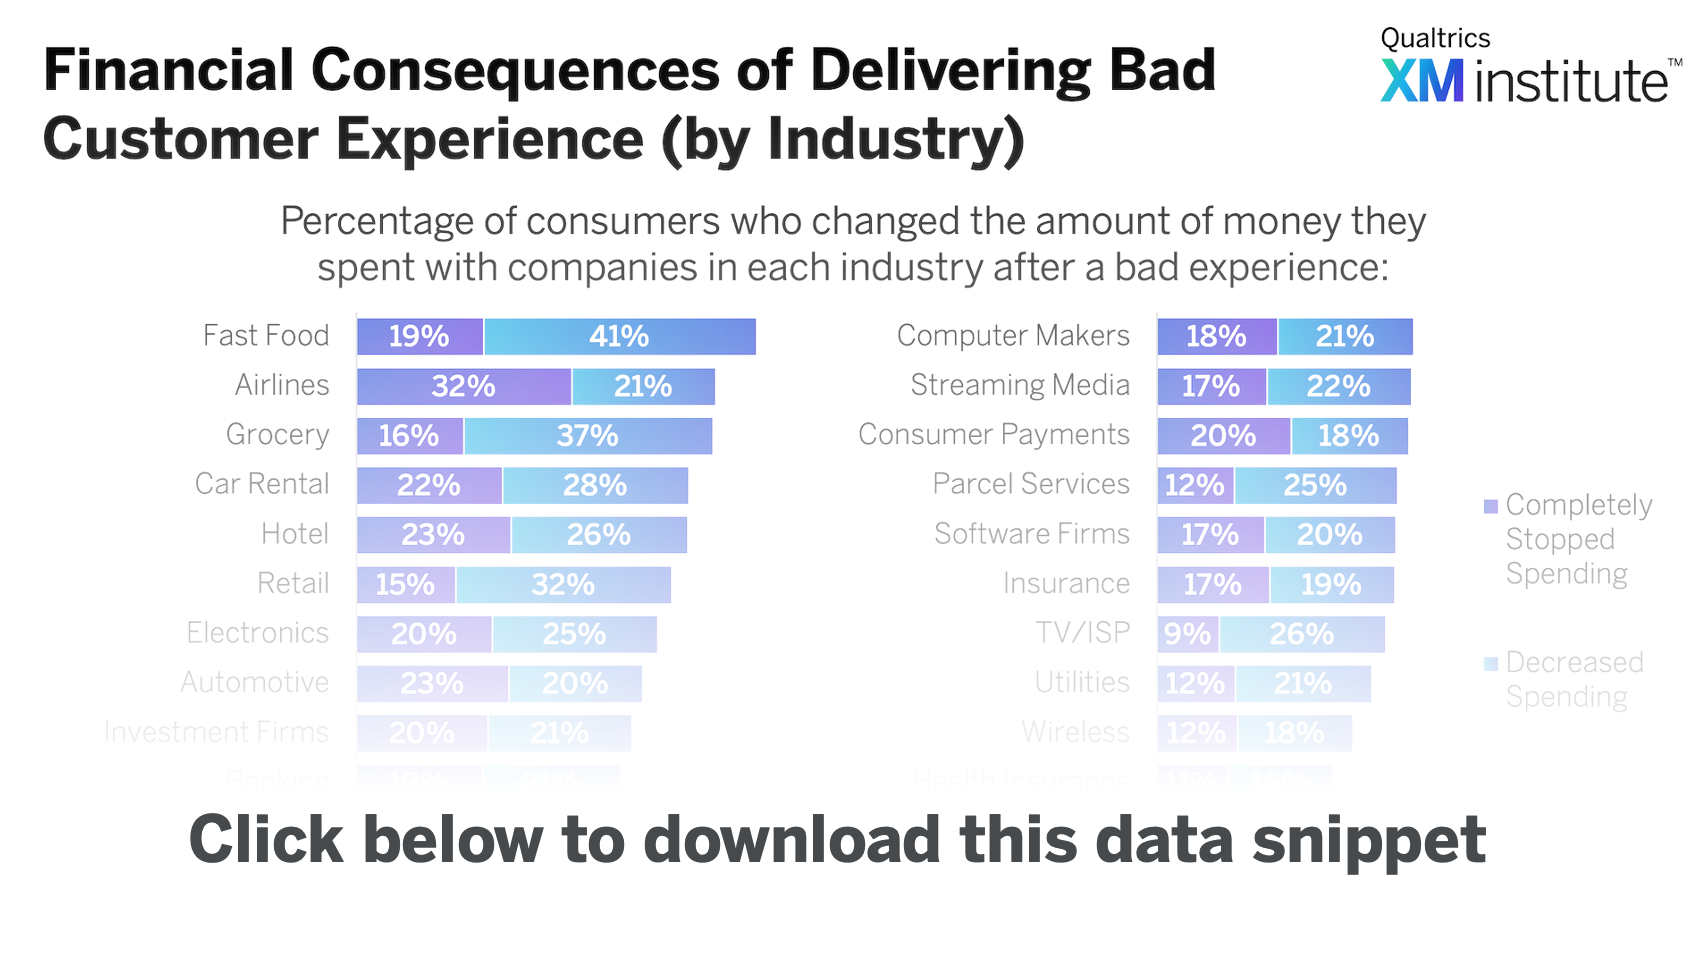 Download Image - Financial Consequences of Bad CX 2020